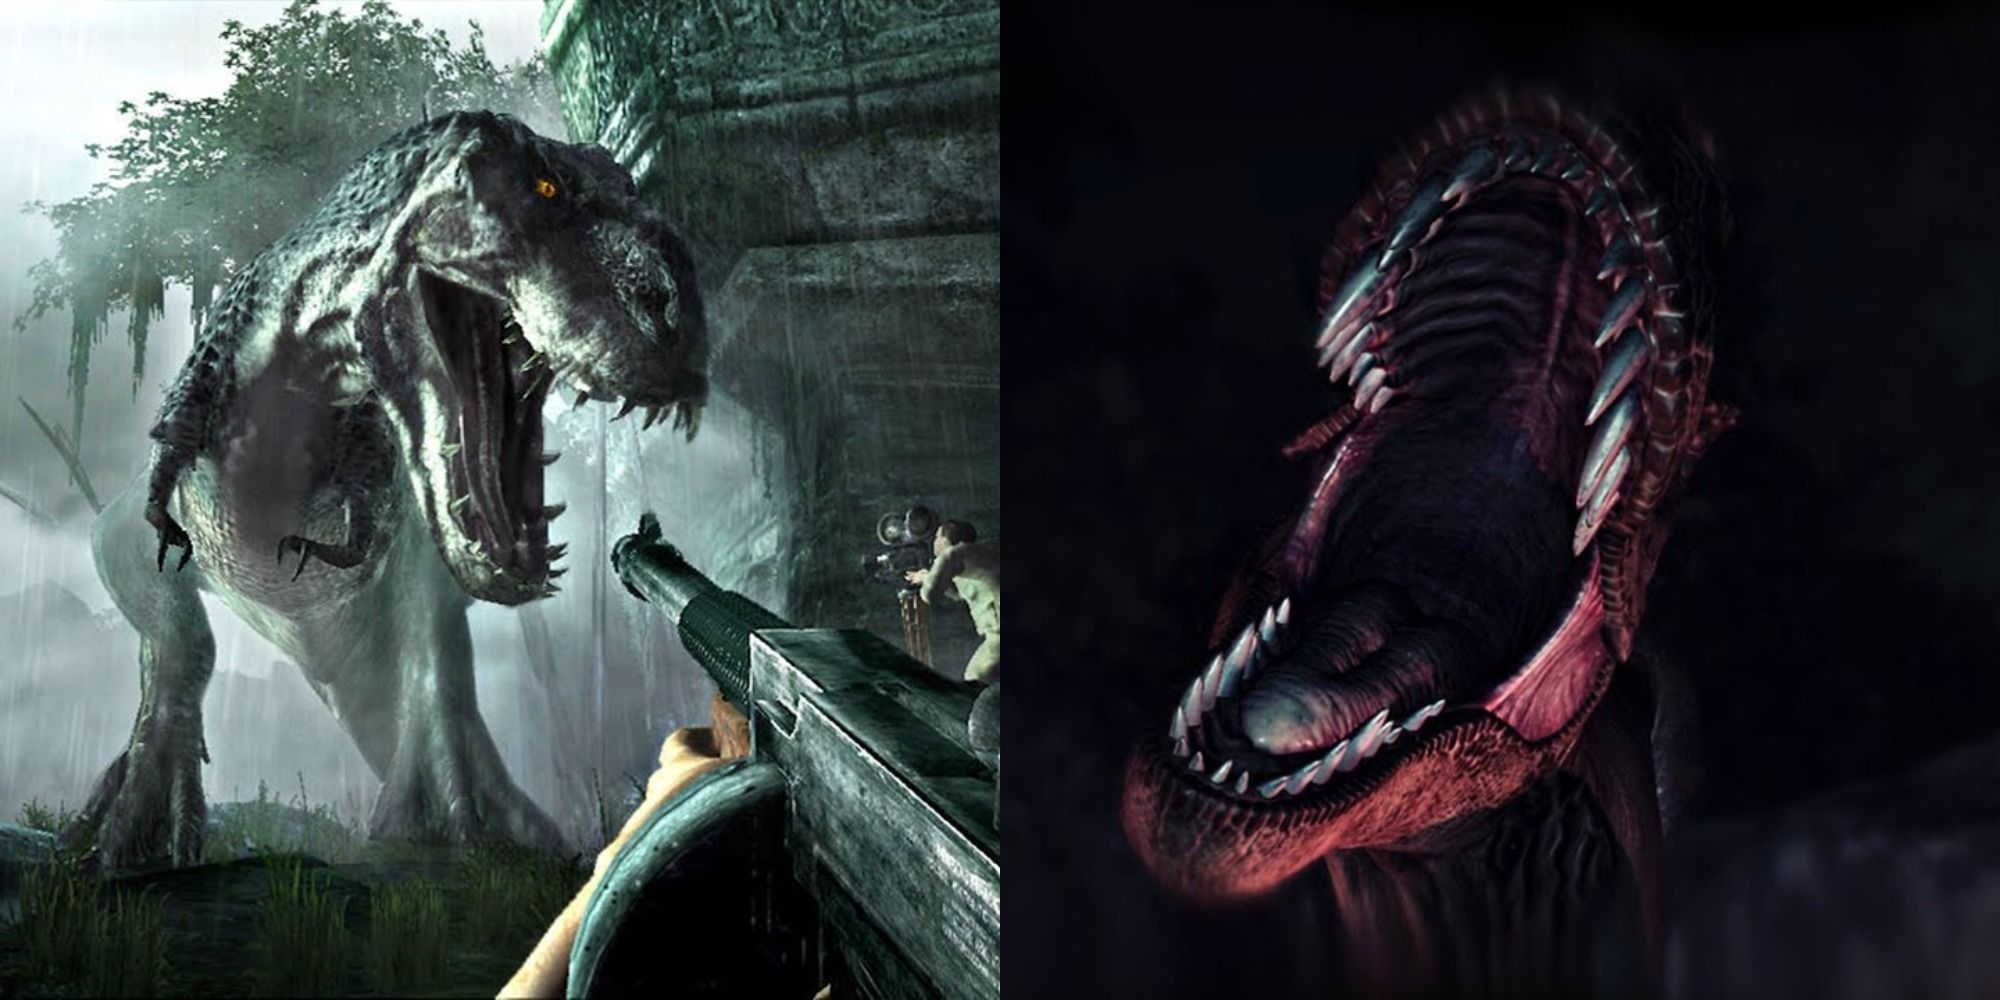 Split image of the V-Rex in King Kong the game and the T-Rex in Oakwood